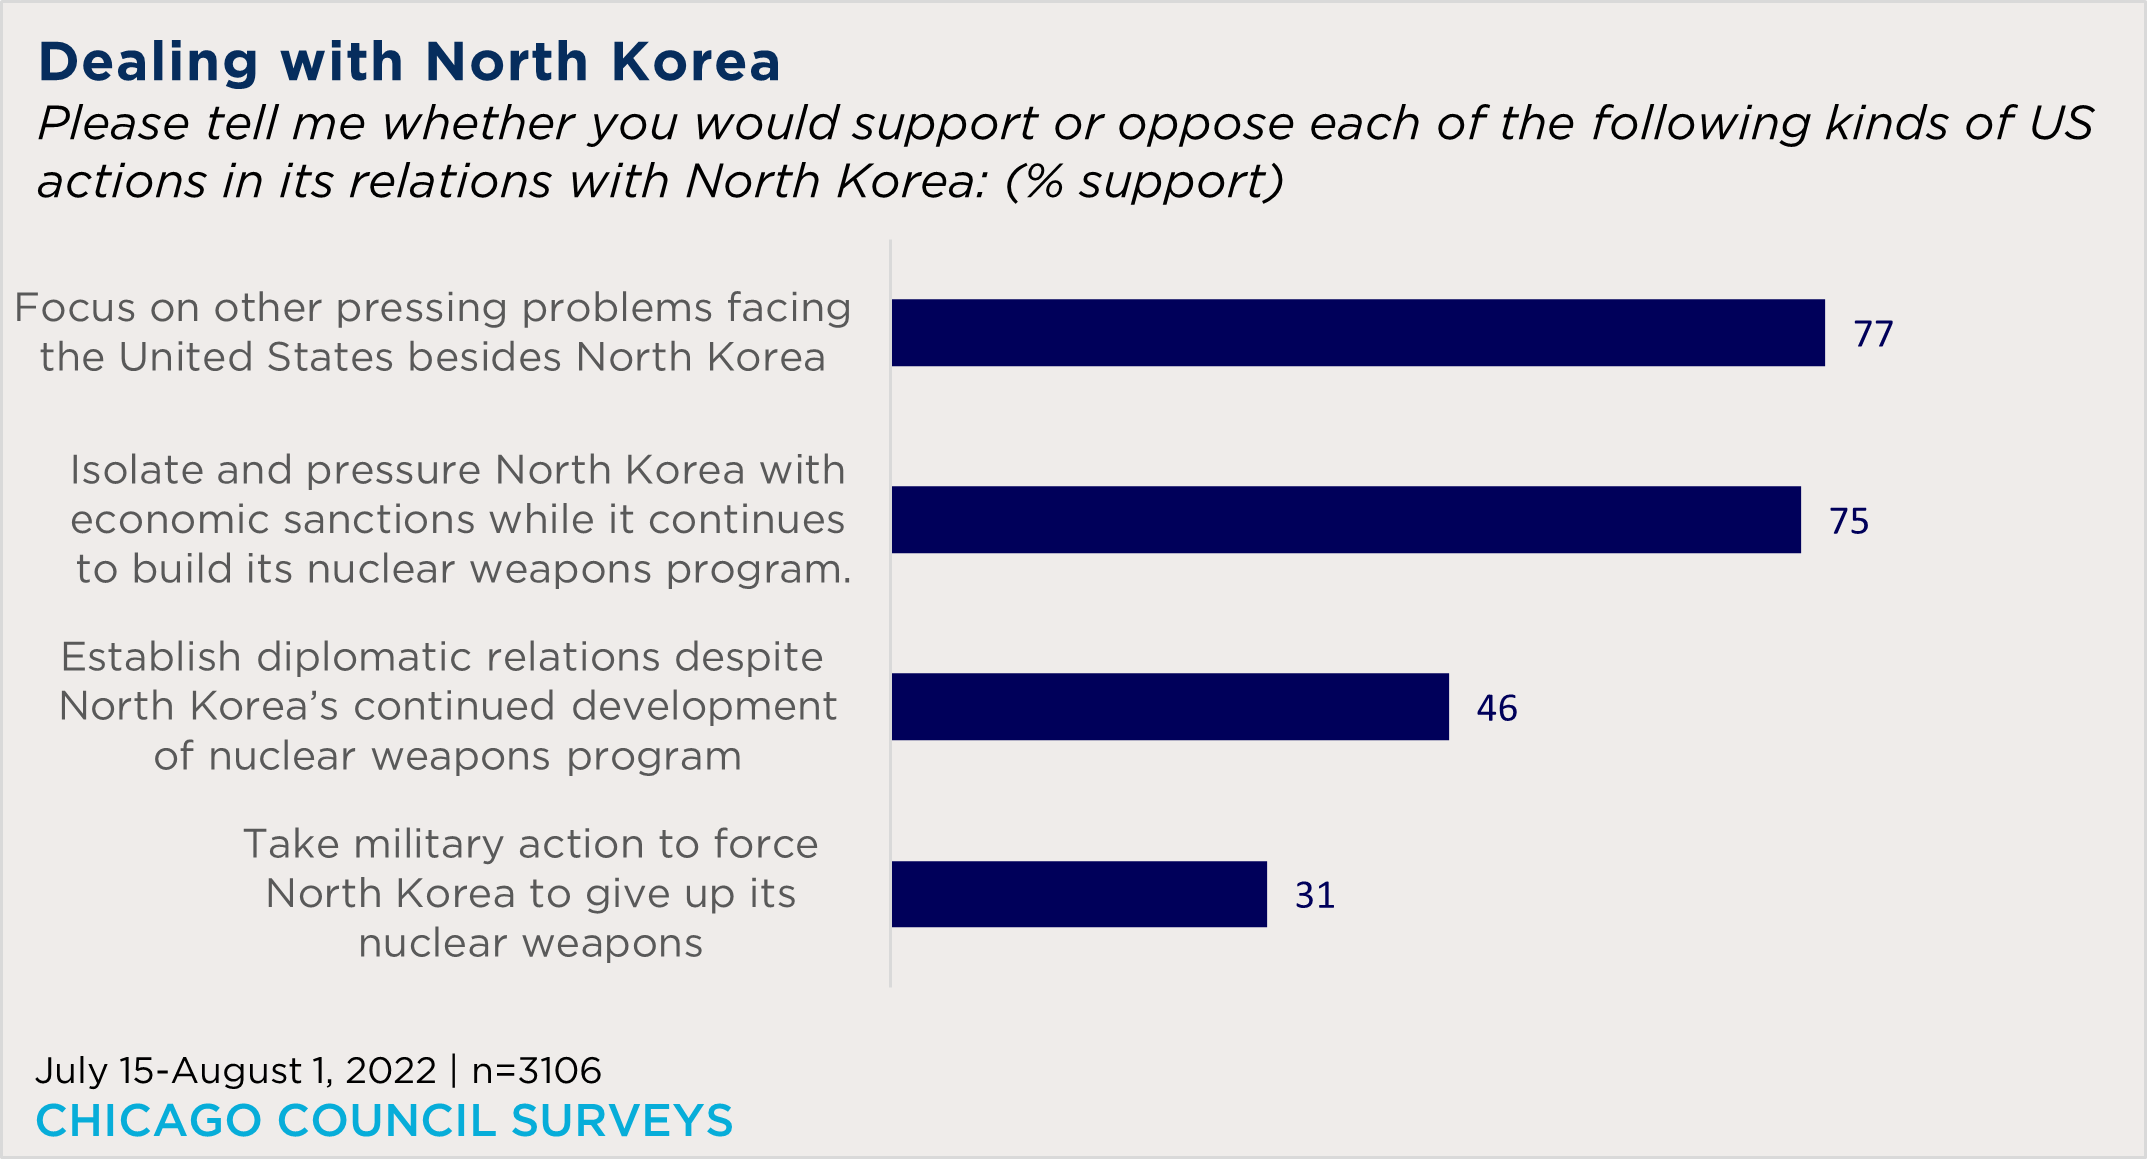 "bar chart showing views on how the US should deal with North Korea"